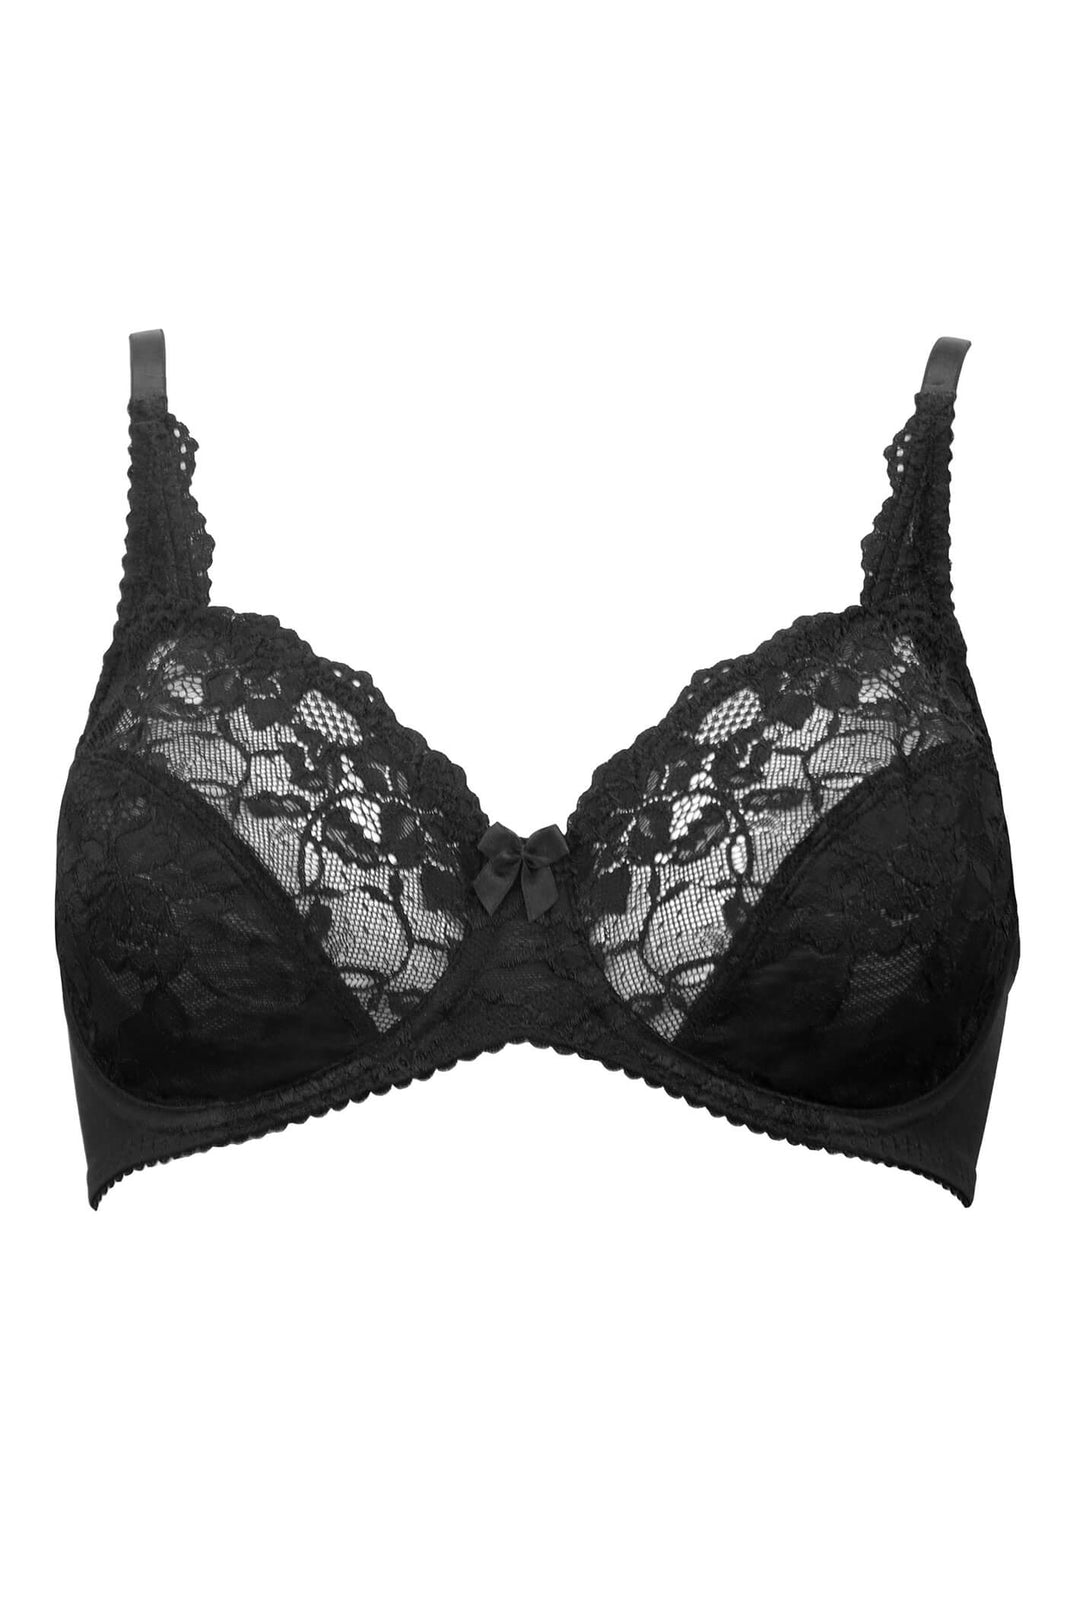 Charnos 116501 Rosalind Black Full Cup Underwired Bra